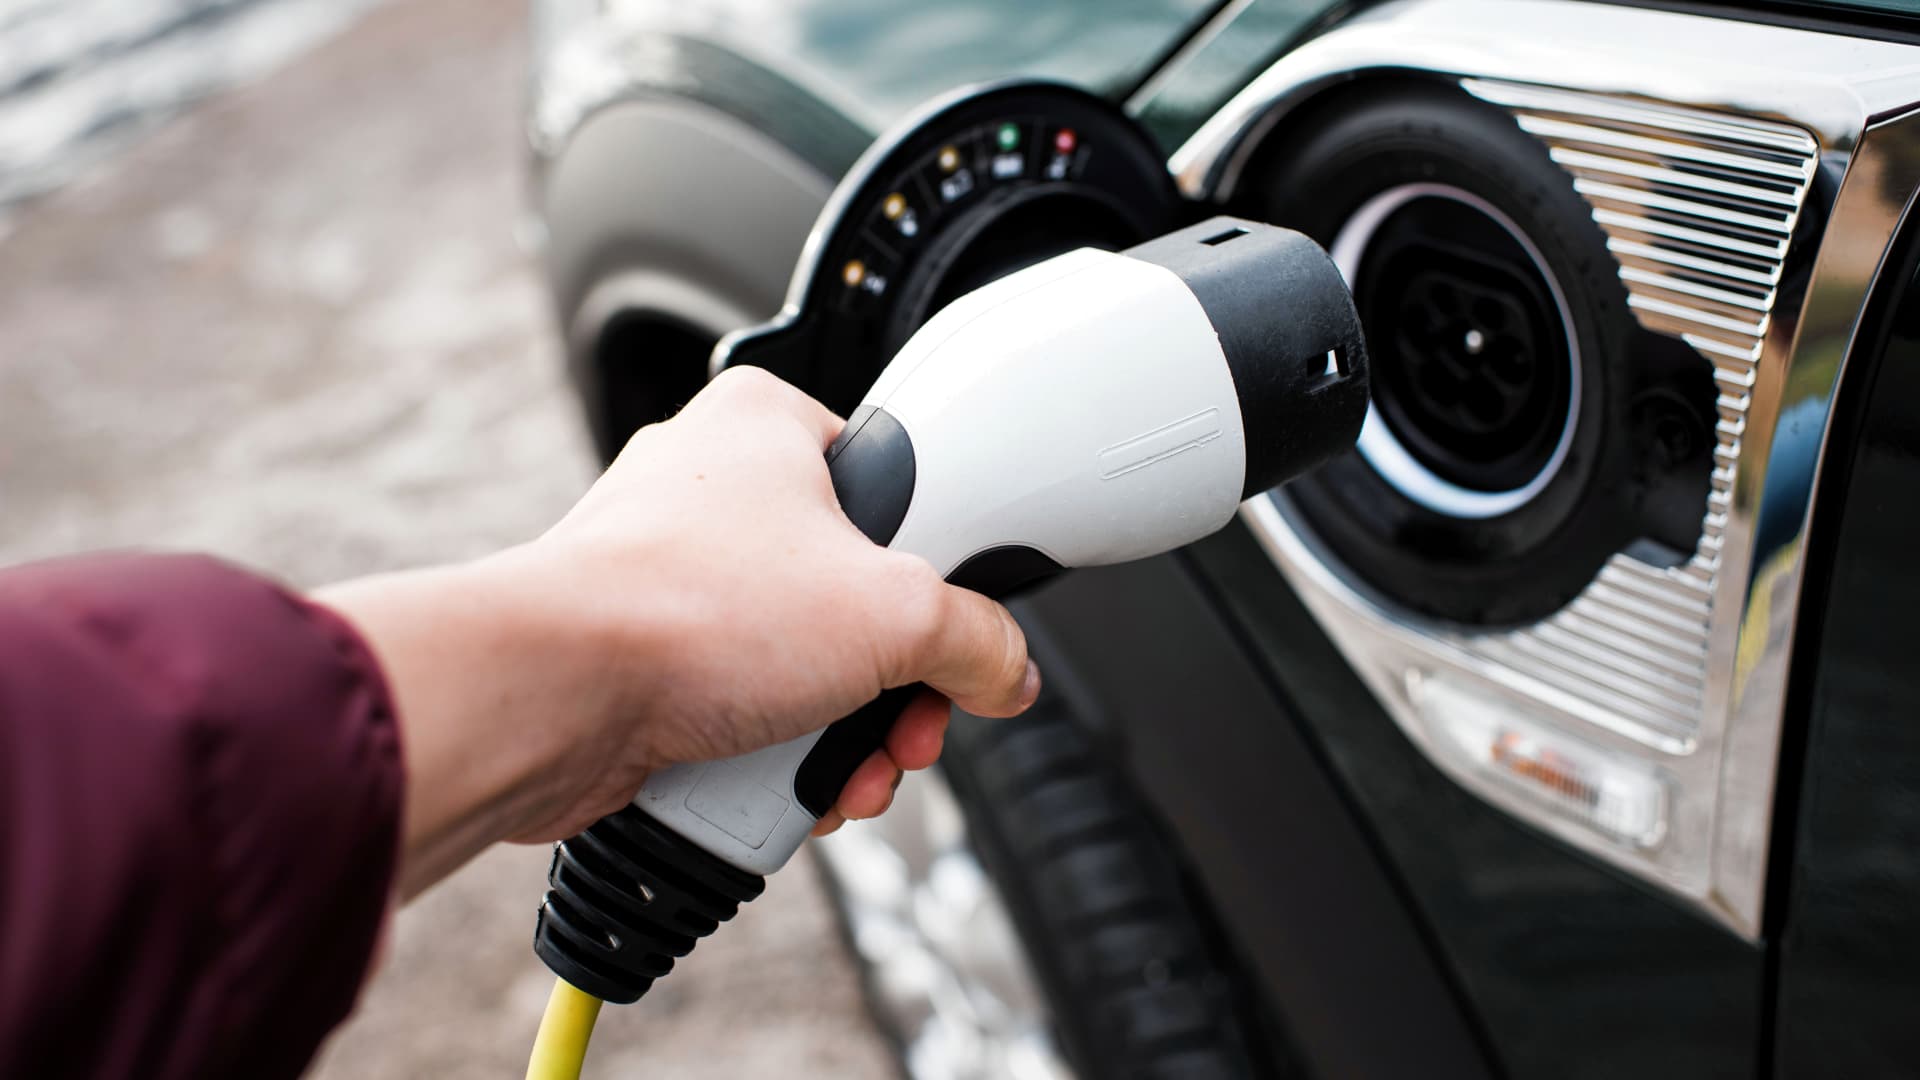 How gas plight economics will alternate in the electrical vehicle charging future